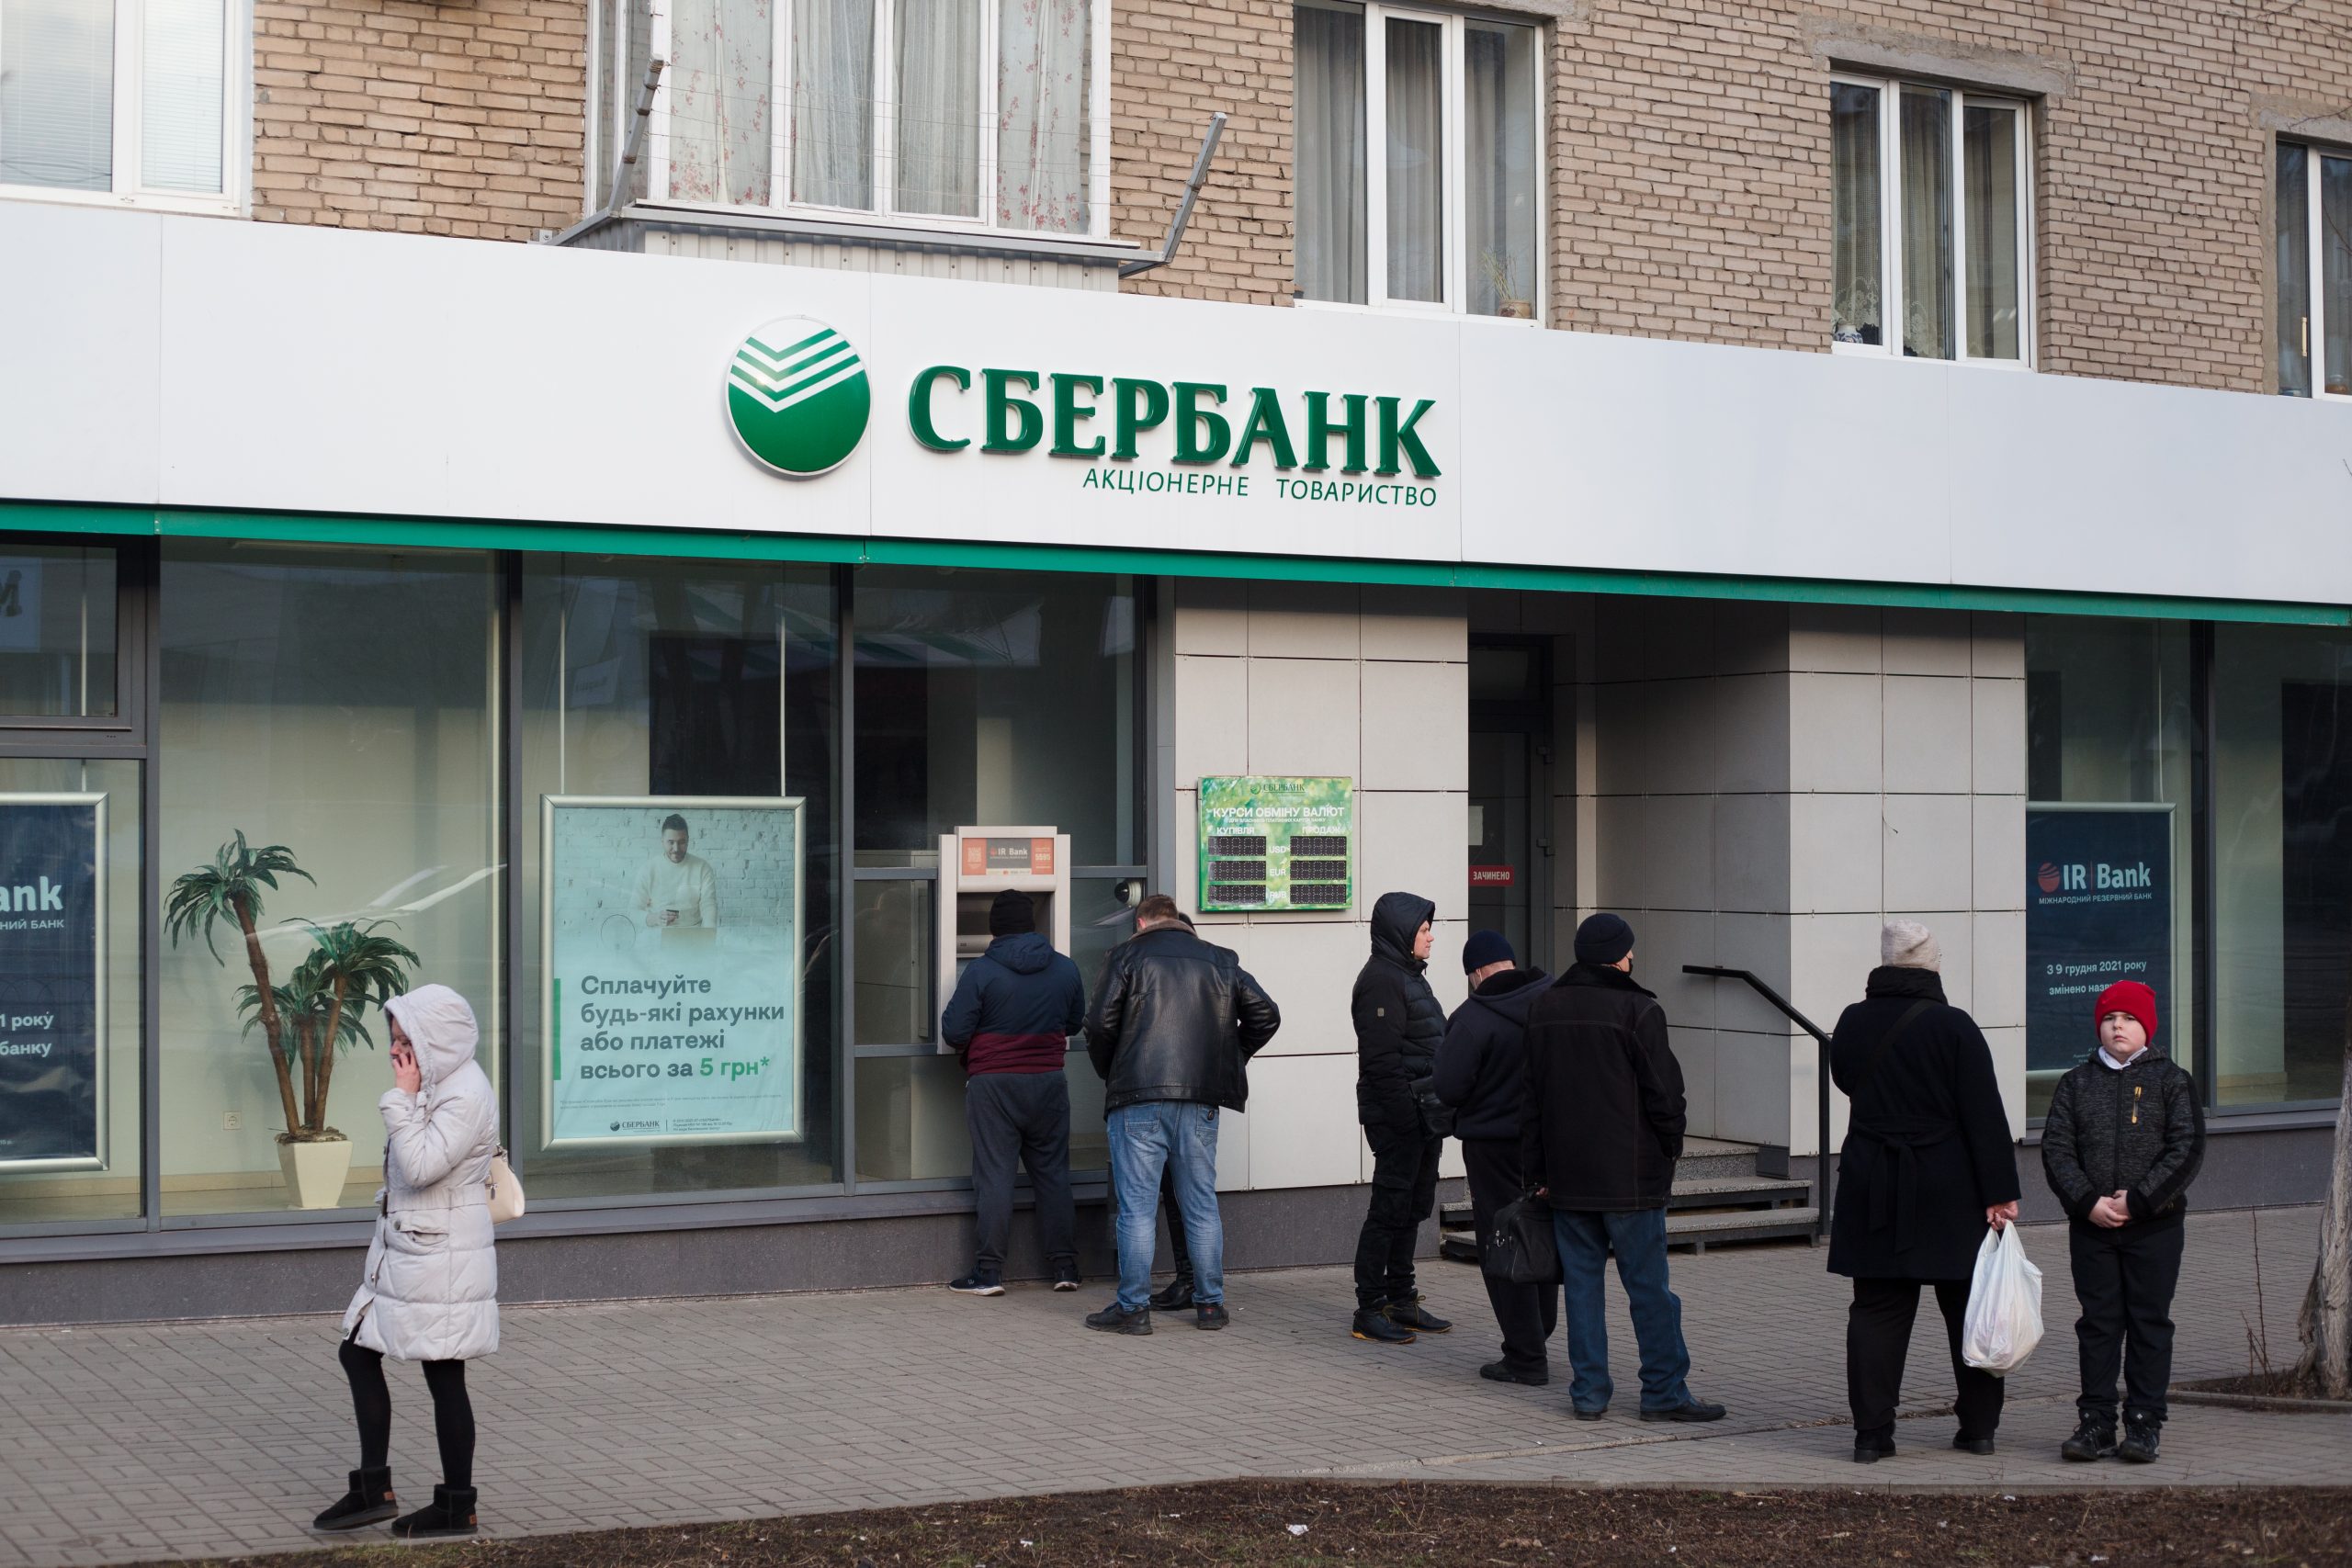 These lawyers and firms are still working with Russian banks, even amid the war